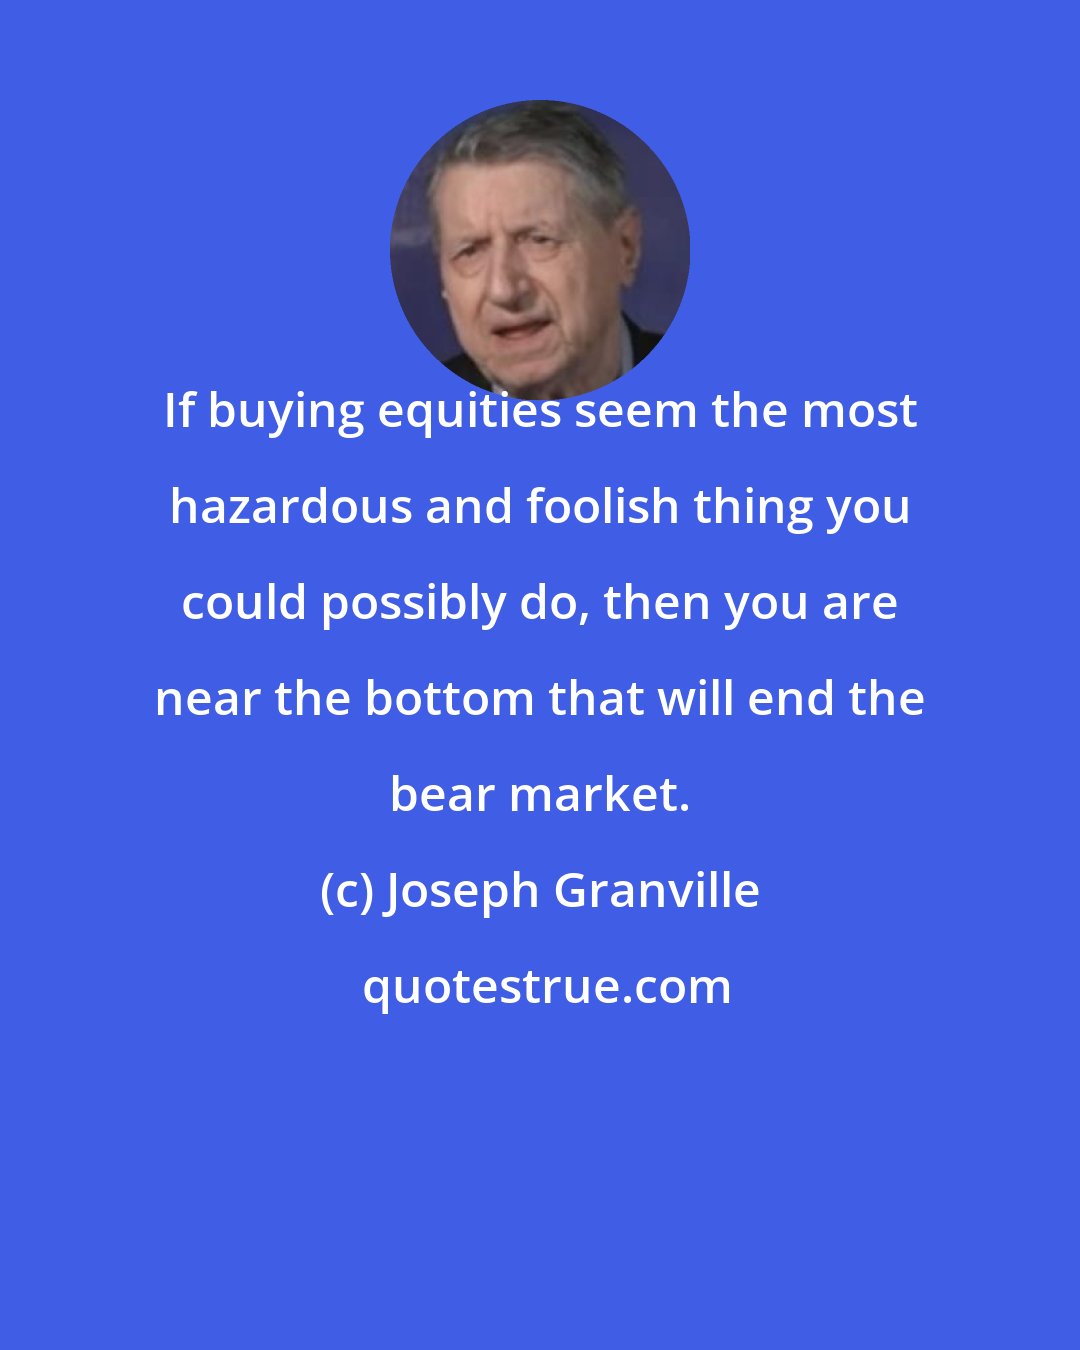 Joseph Granville: If buying equities seem the most hazardous and foolish thing you could possibly do, then you are near the bottom that will end the bear market.